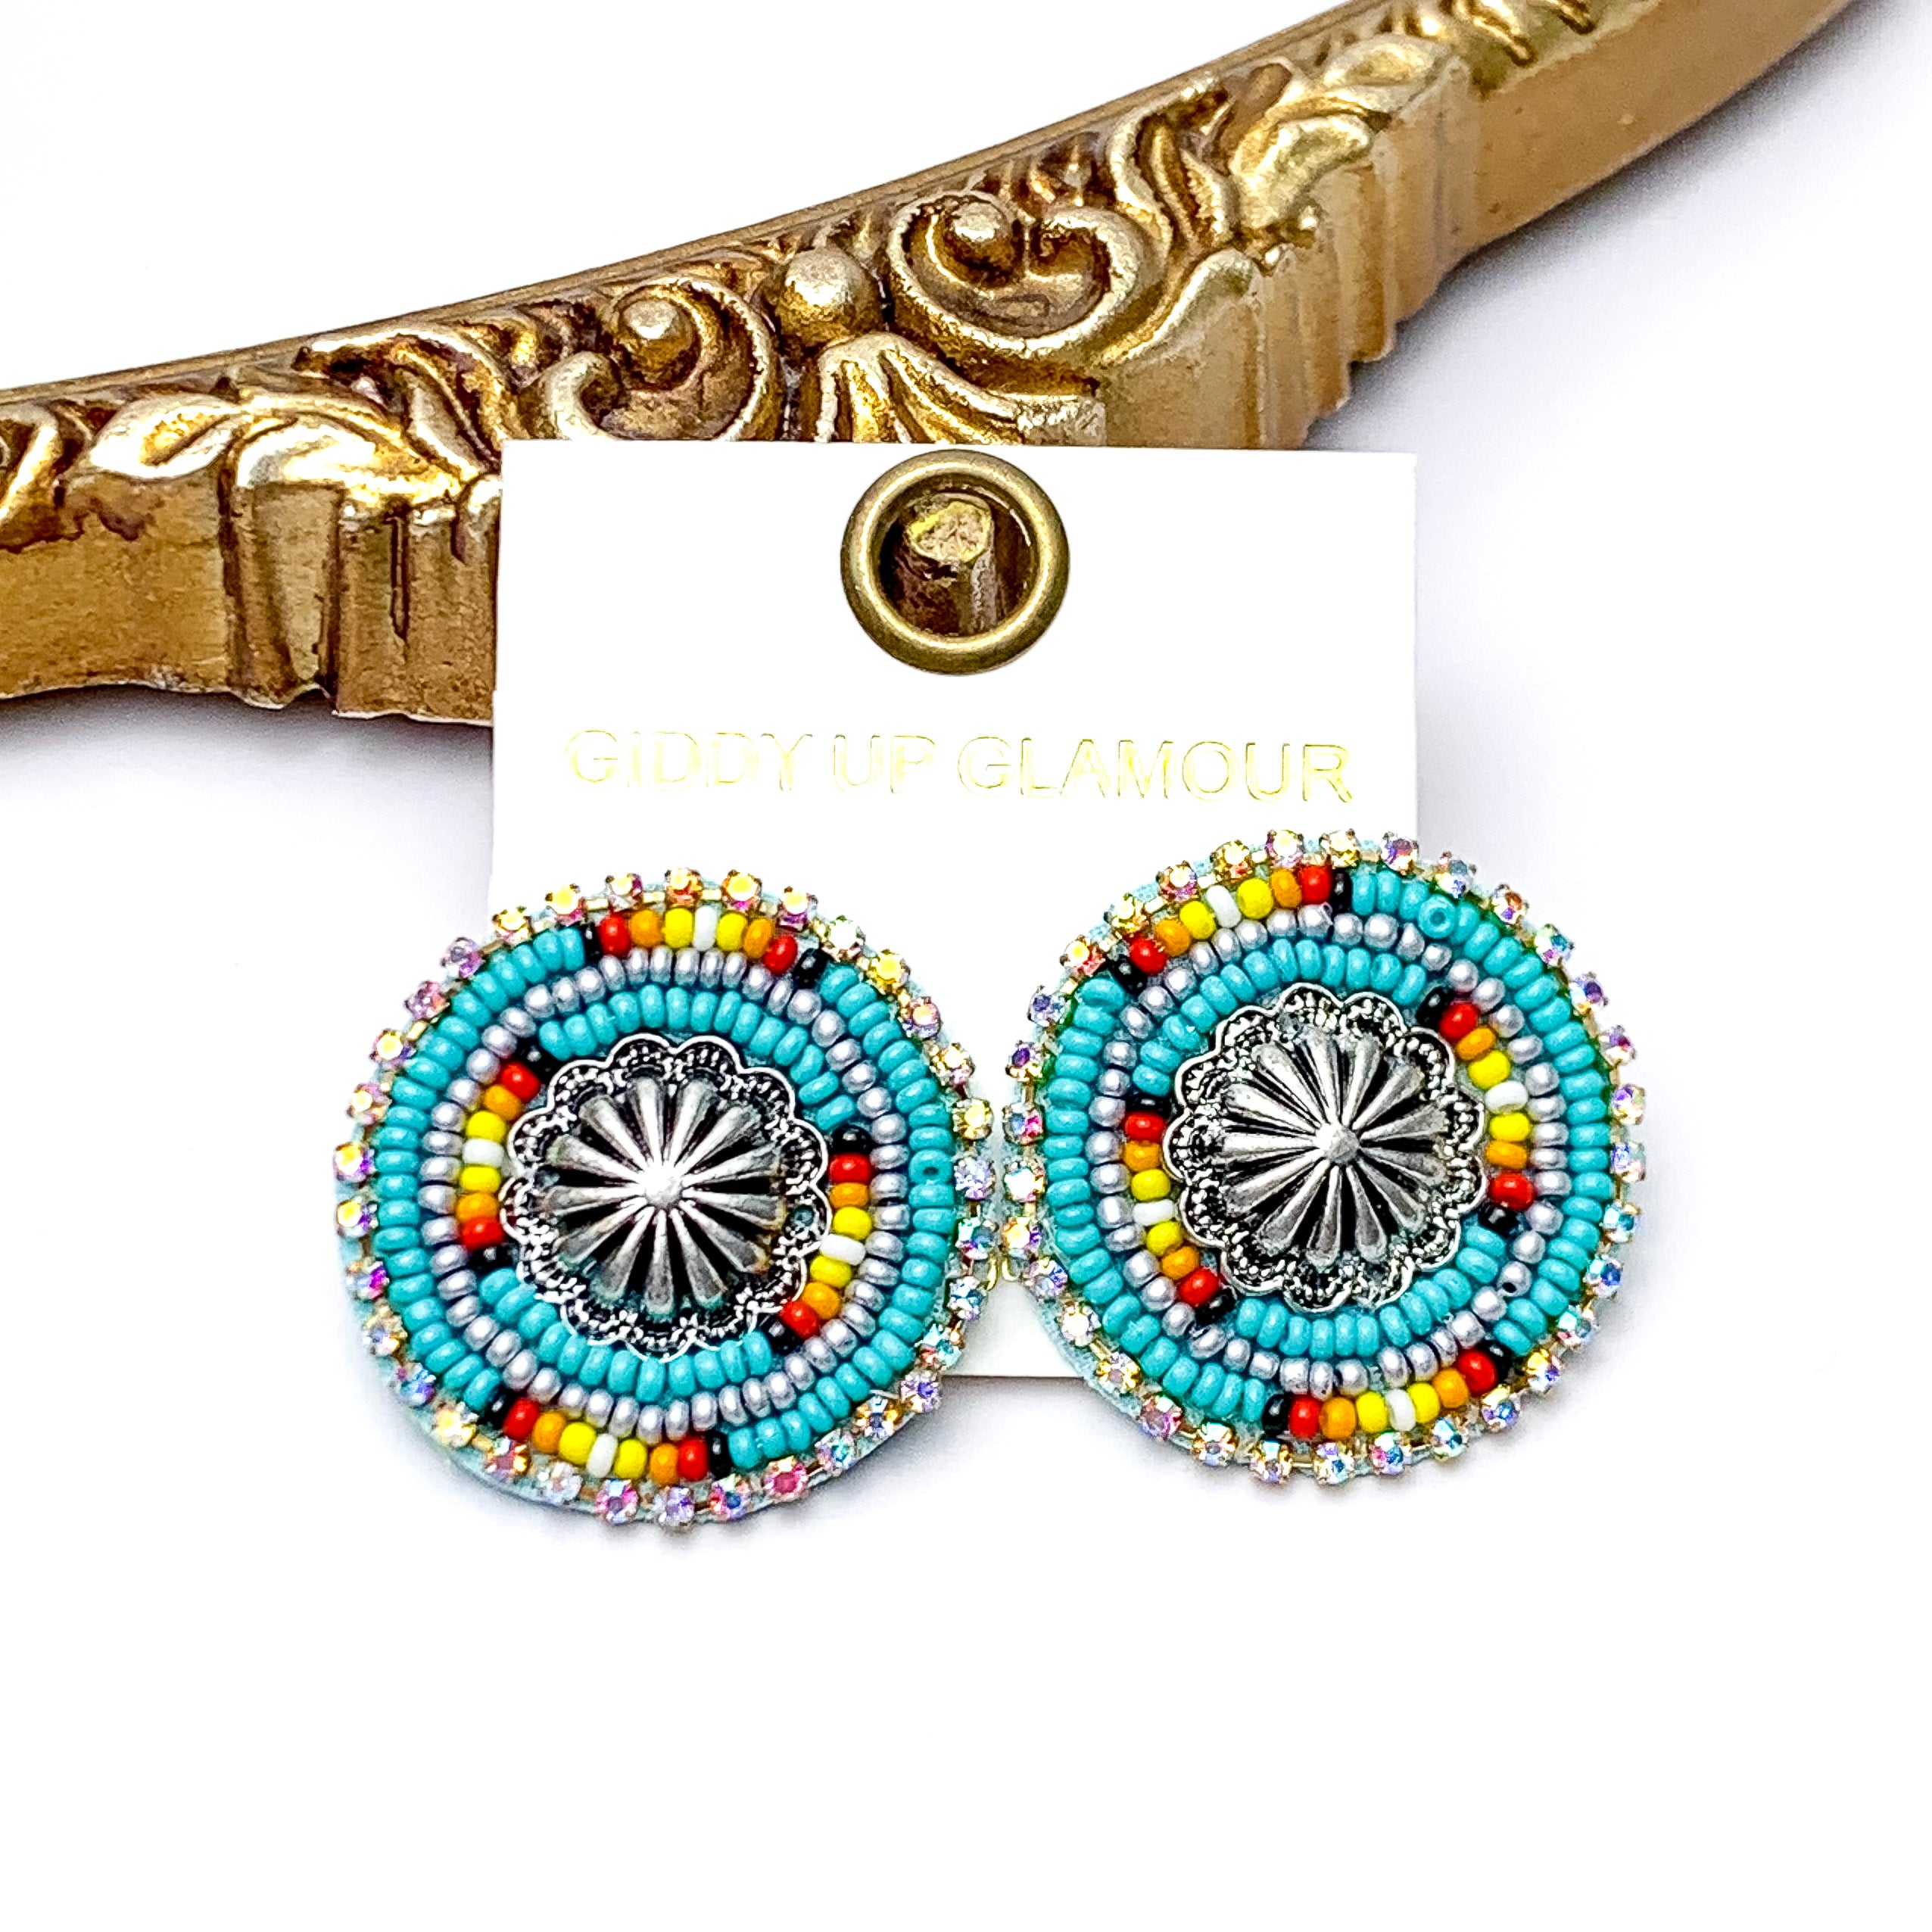 Frontier Flair Concho Seed Beaded Stud Earrings in Turquoise